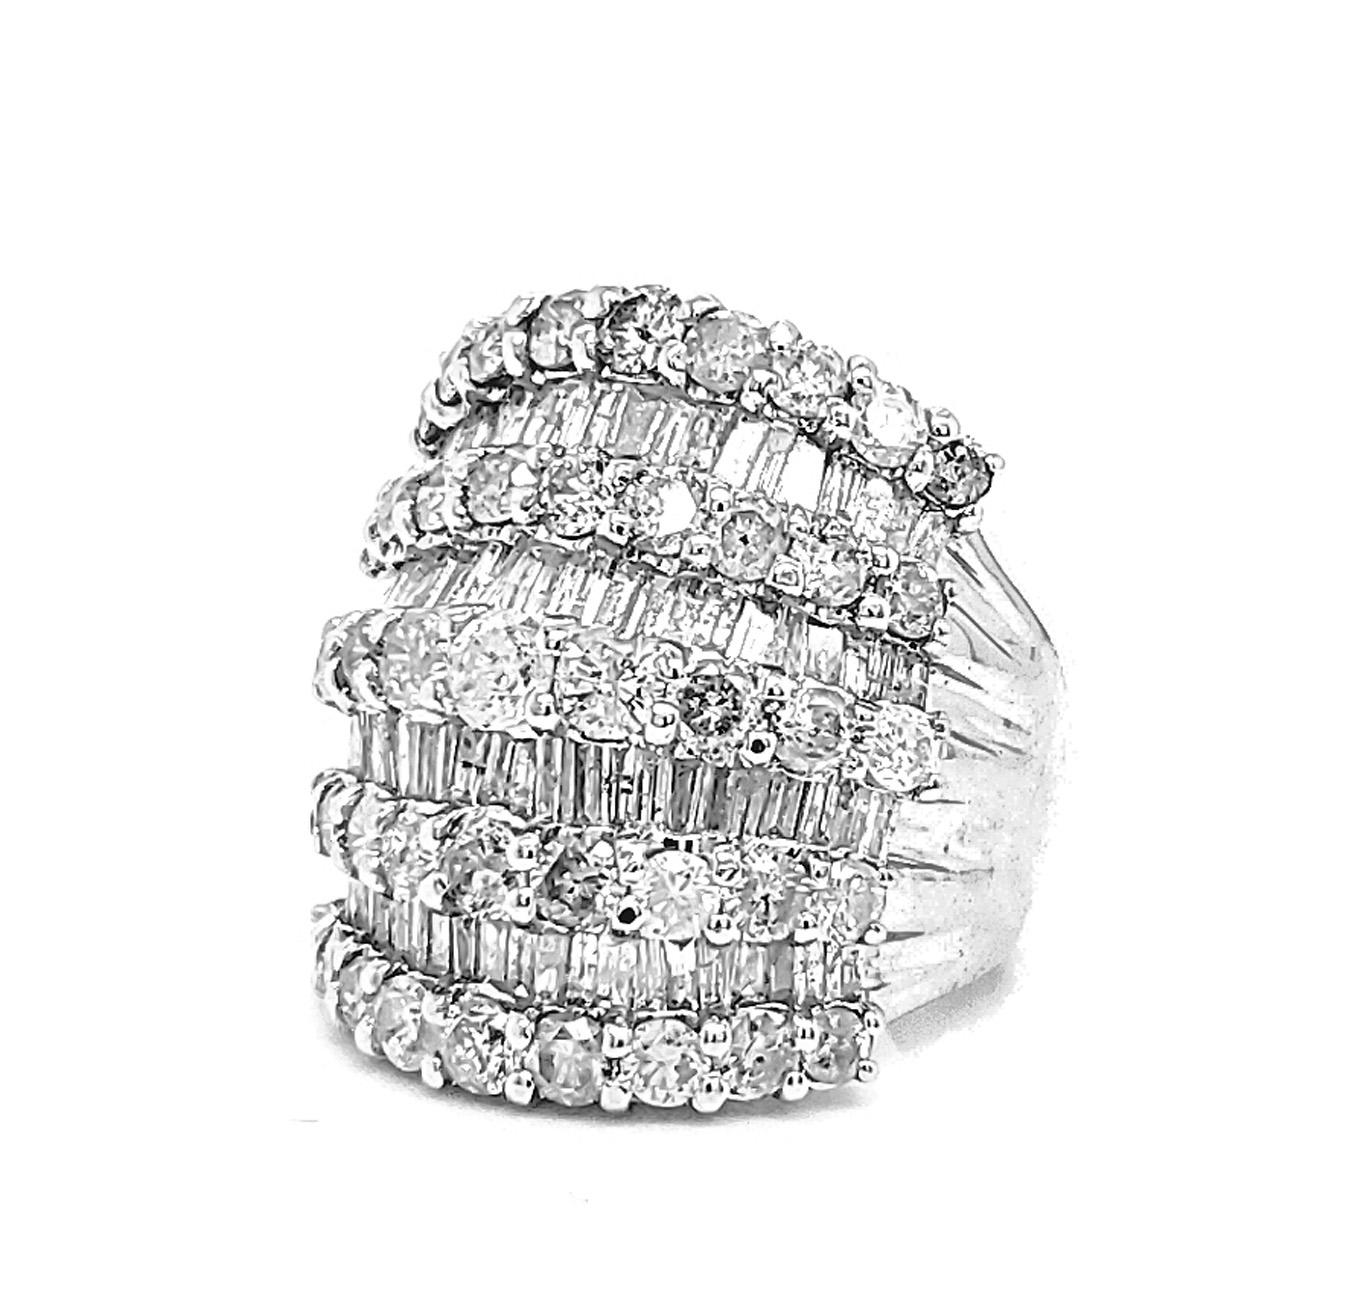 The 5.56 Carat White Diamond Statement Ring made by Shimon's Creations can dazzle any crowd. This ring has 9 rows of diamonds with a lovely pattern of baguettes and round cut stones. The 18k white gold ring features 3.69 carats of round cut white